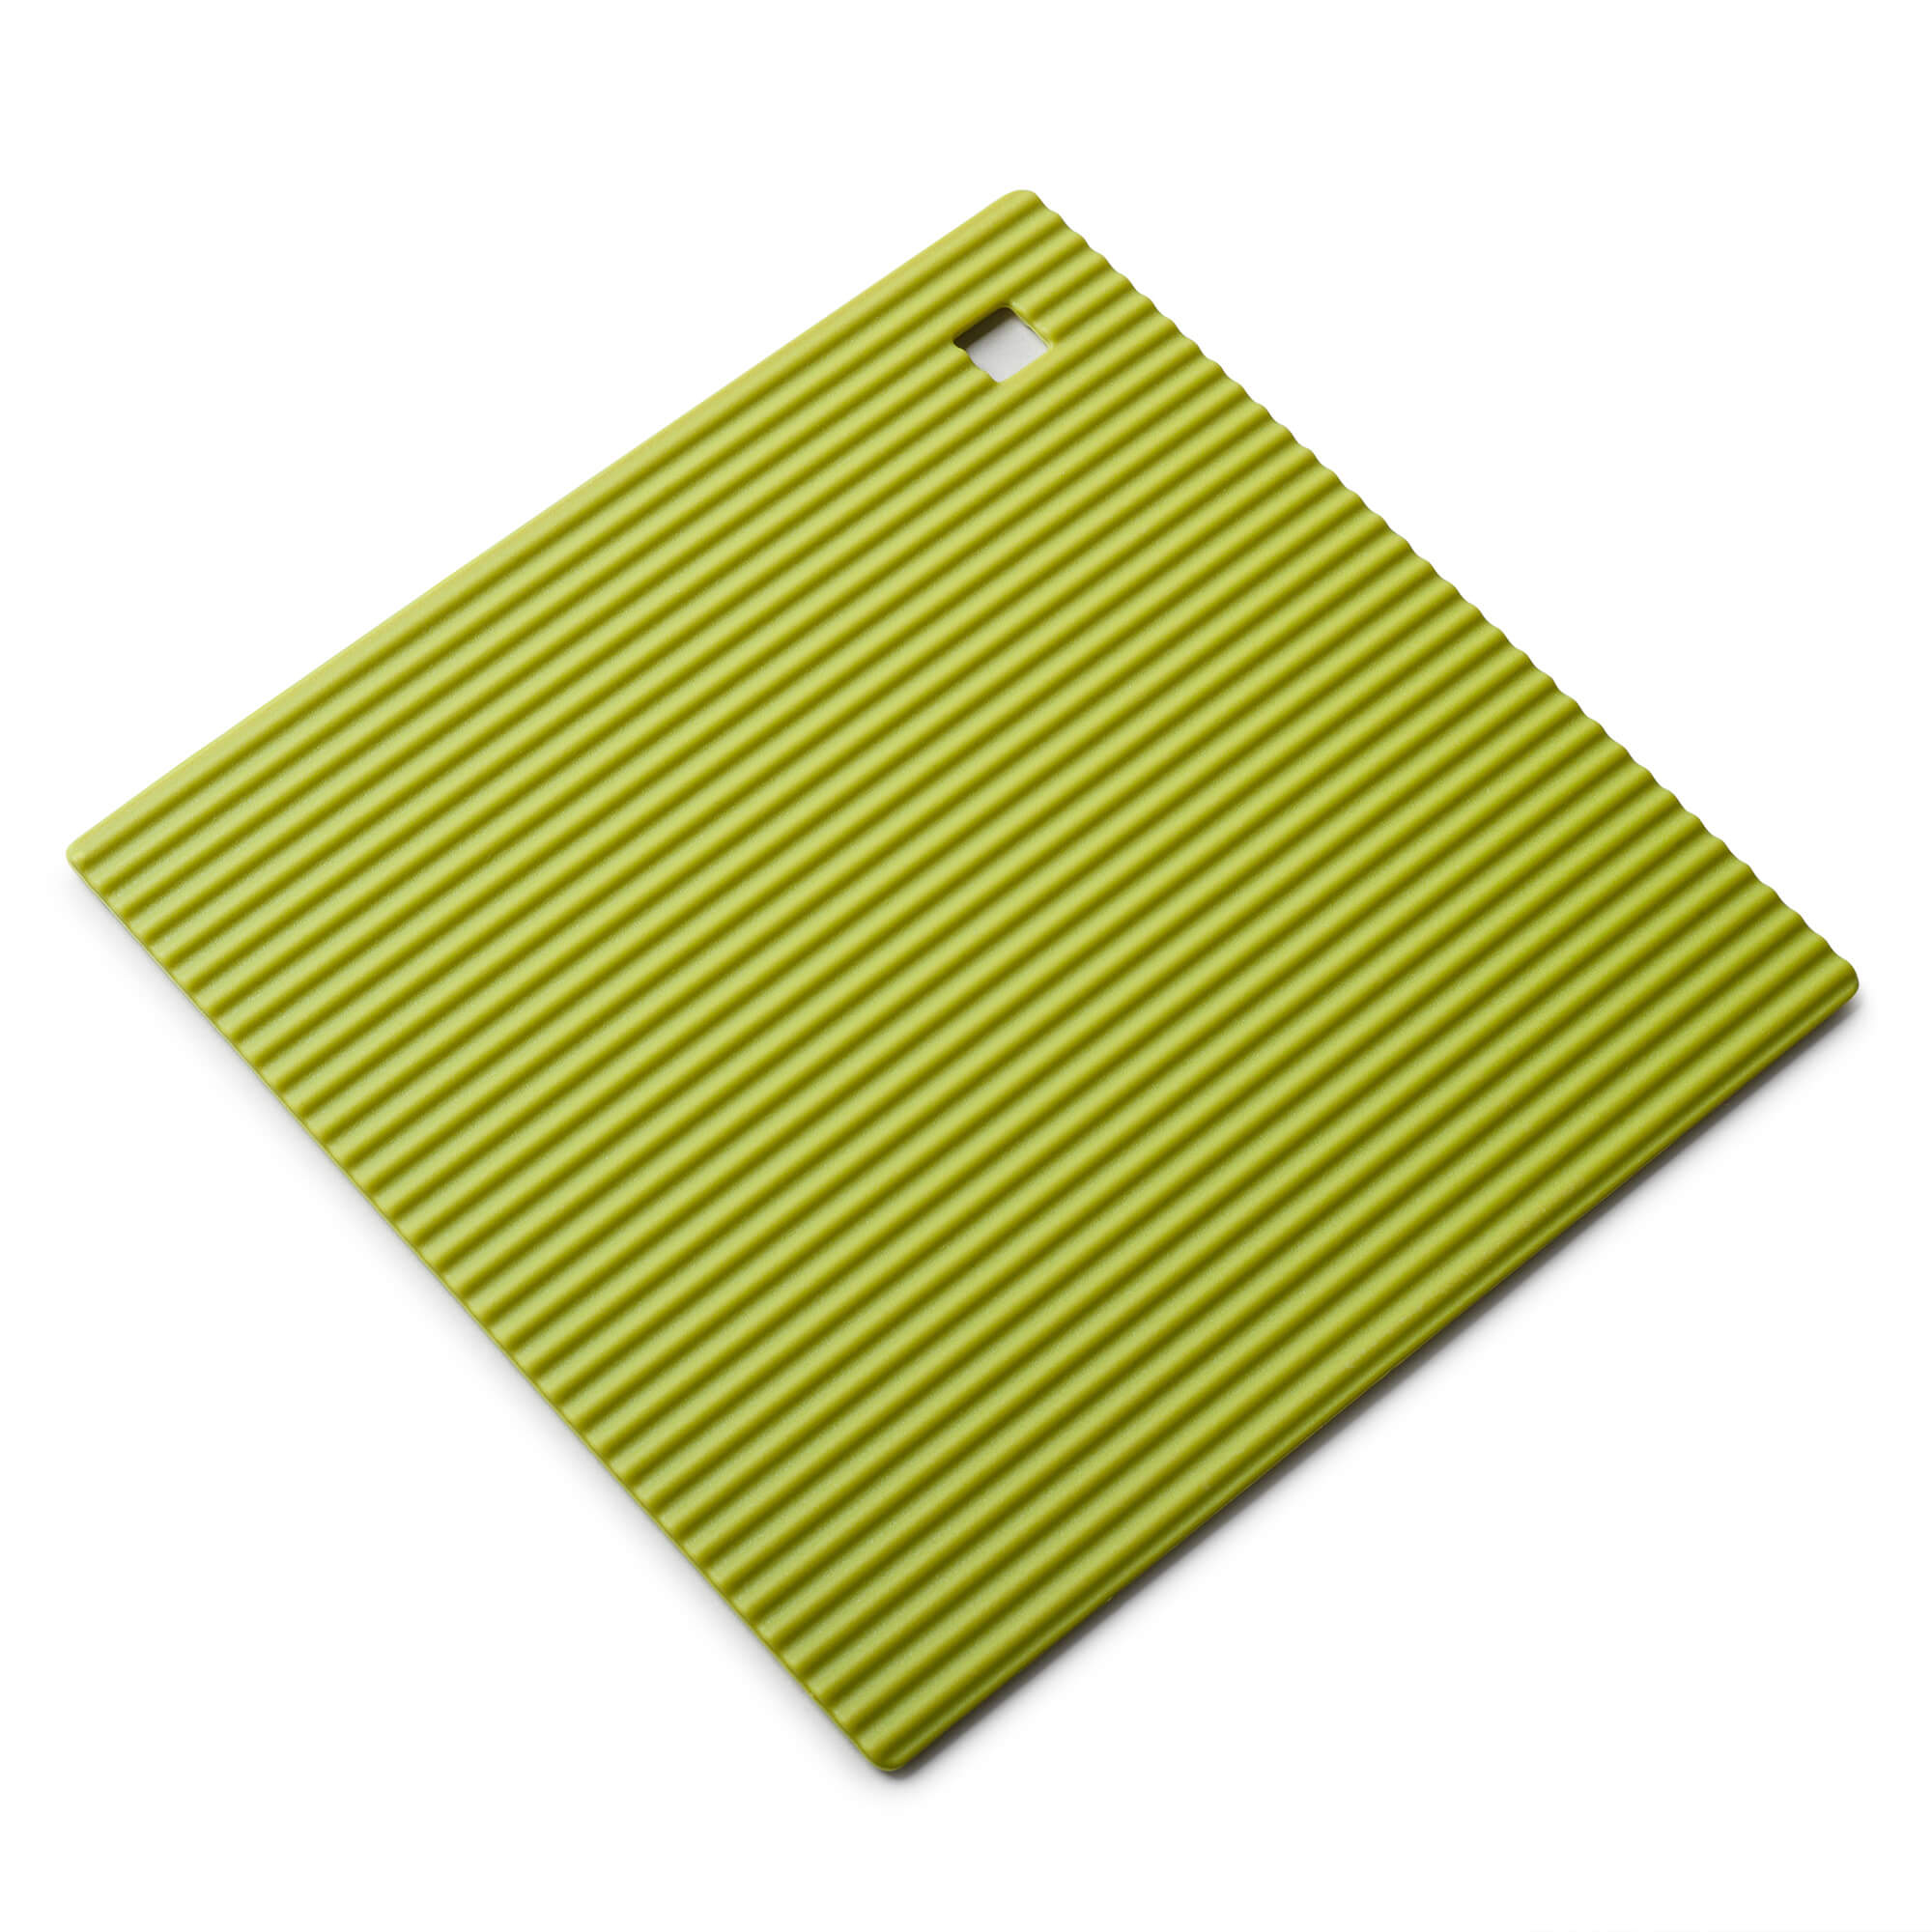 Lodge 7 in Square Silicone Skillet Pattern Trivet, Yellow